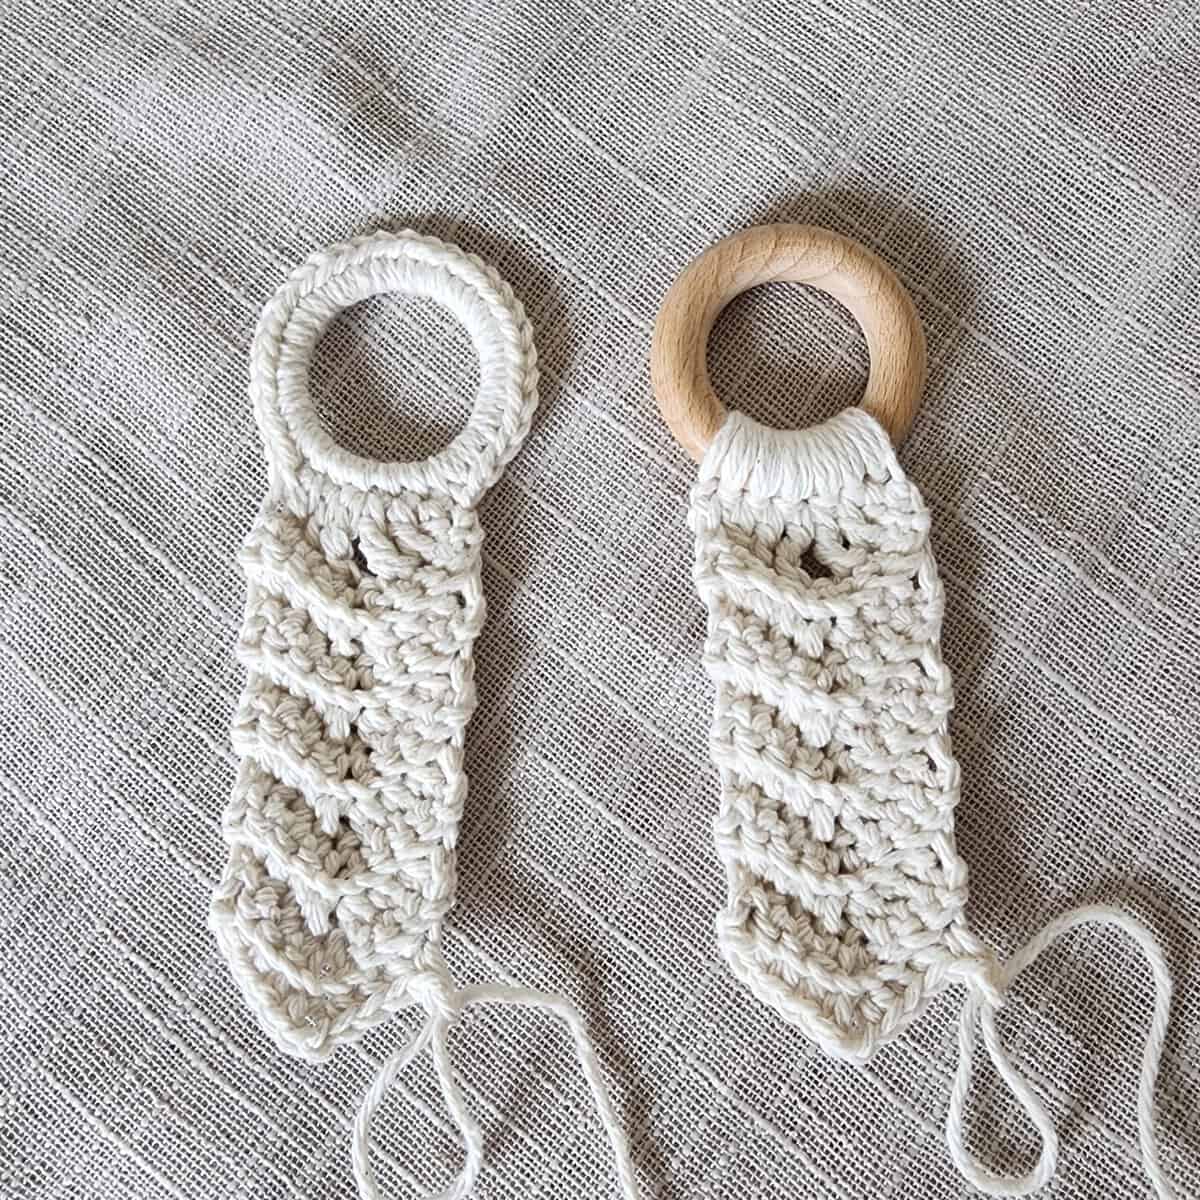 Two plant hanger ring and hanging strap options, one all yarn and the other yarn and wooden ring.